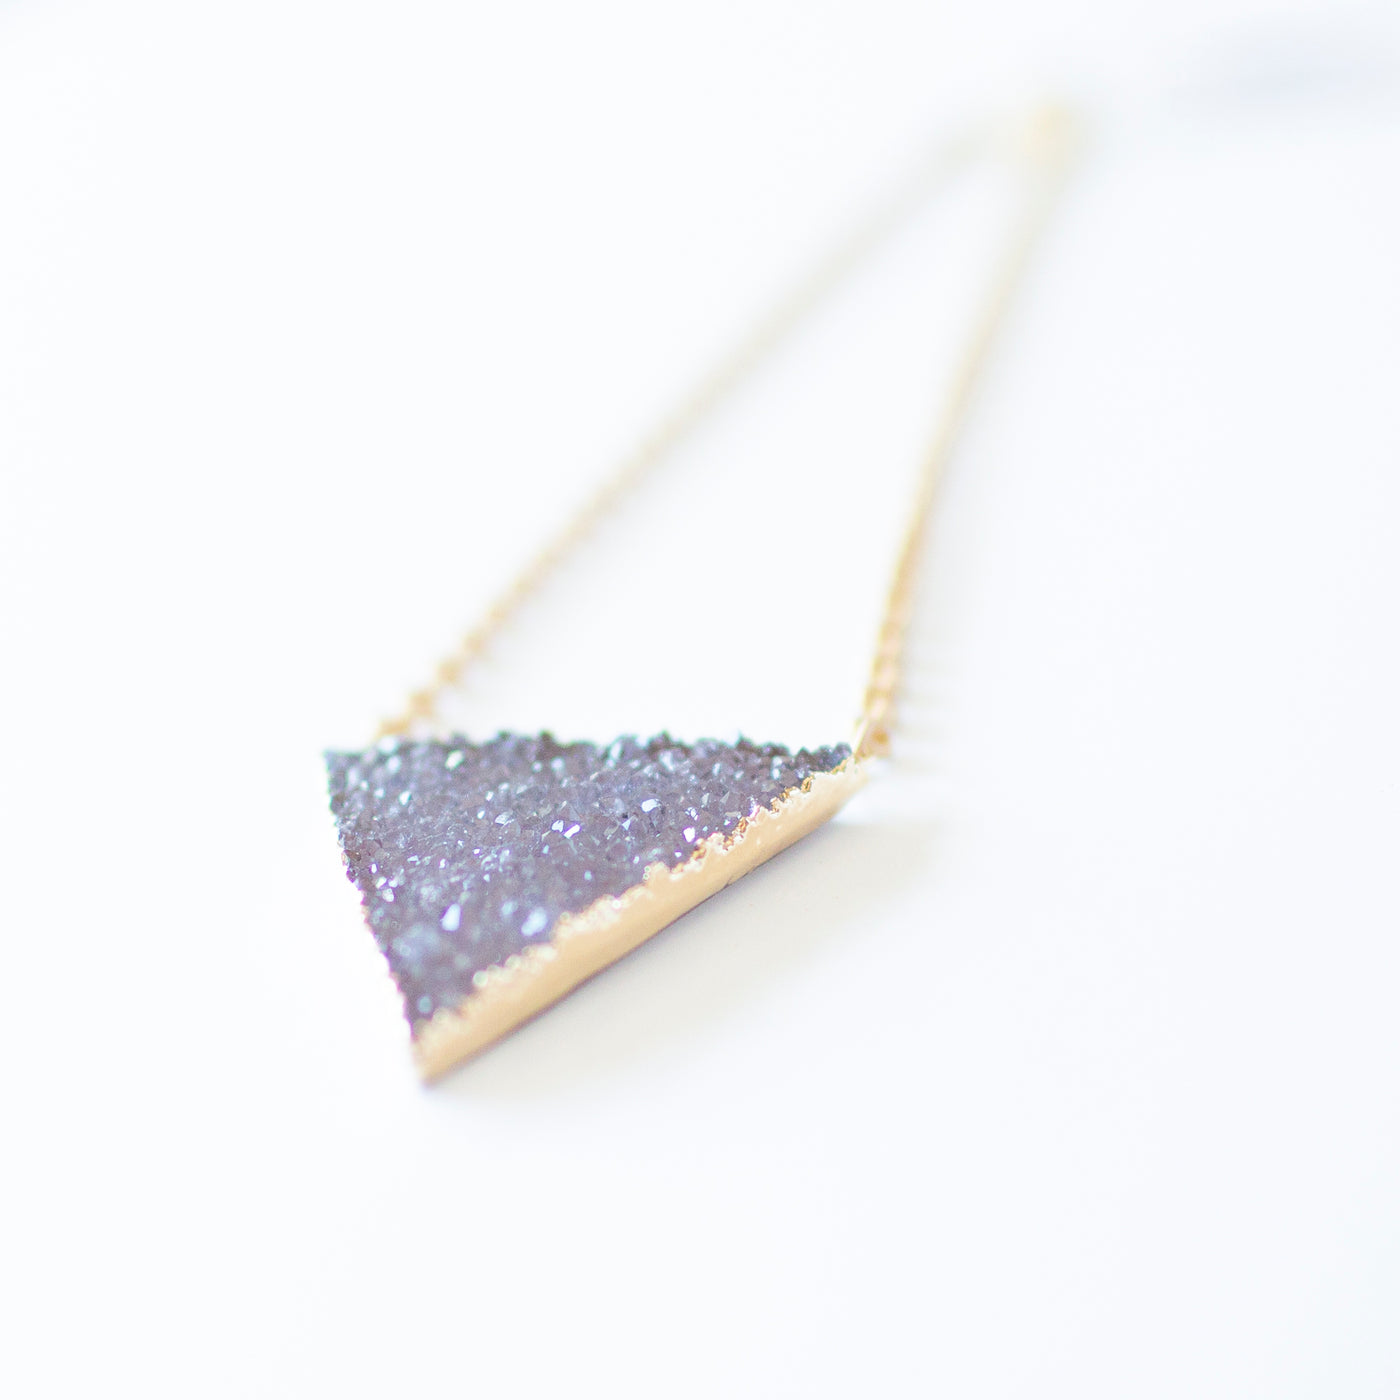 Triangle Druzy Quartz Pendant Necklace by Karli Buxton - Corinne an Affordable Women's Clothing Boutique in the US USA